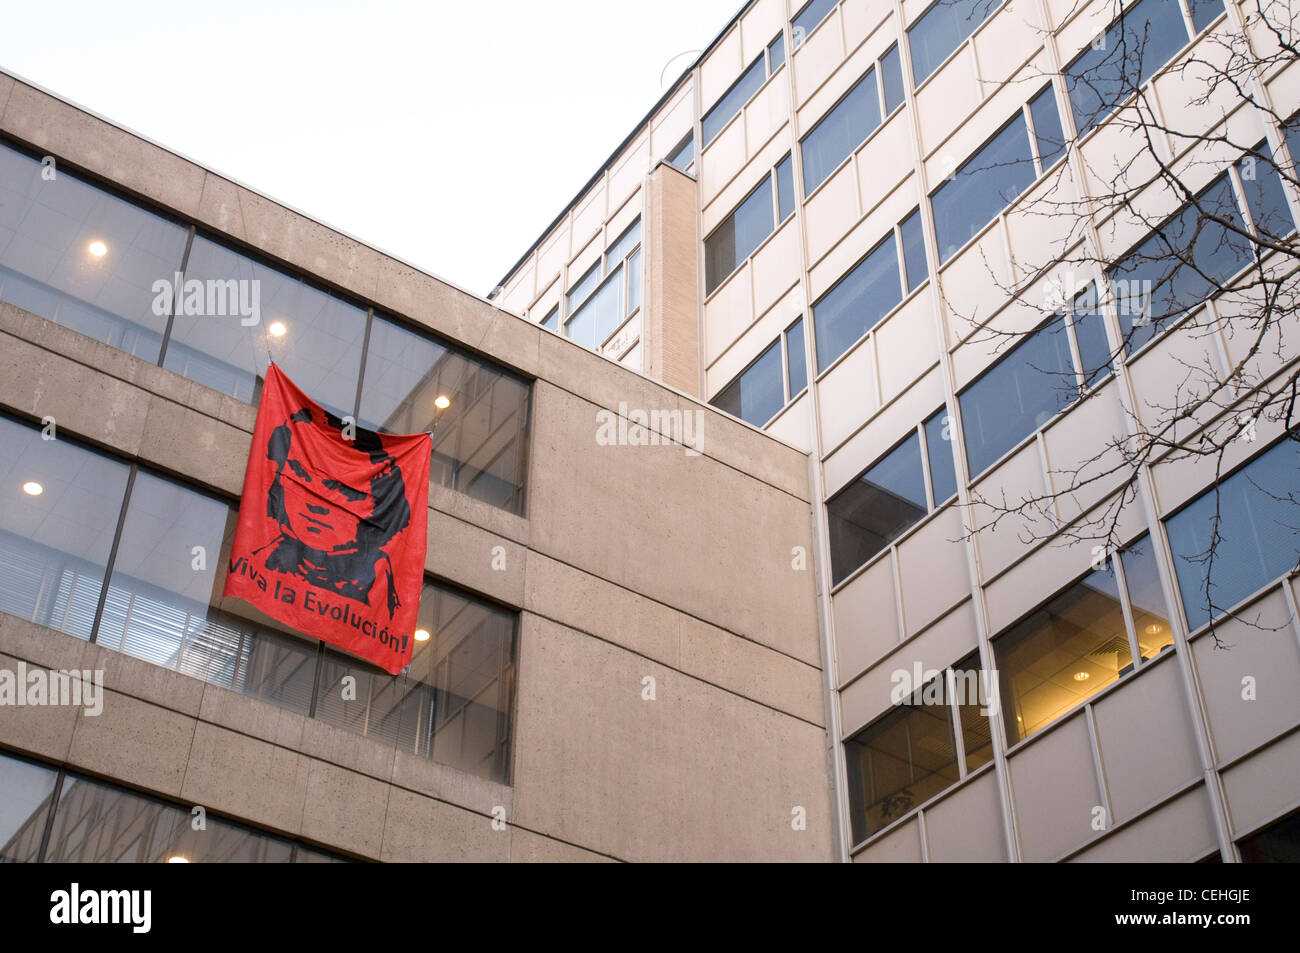 To celebrate Darwin's 200th birthday, MIT hackers put a large red ...